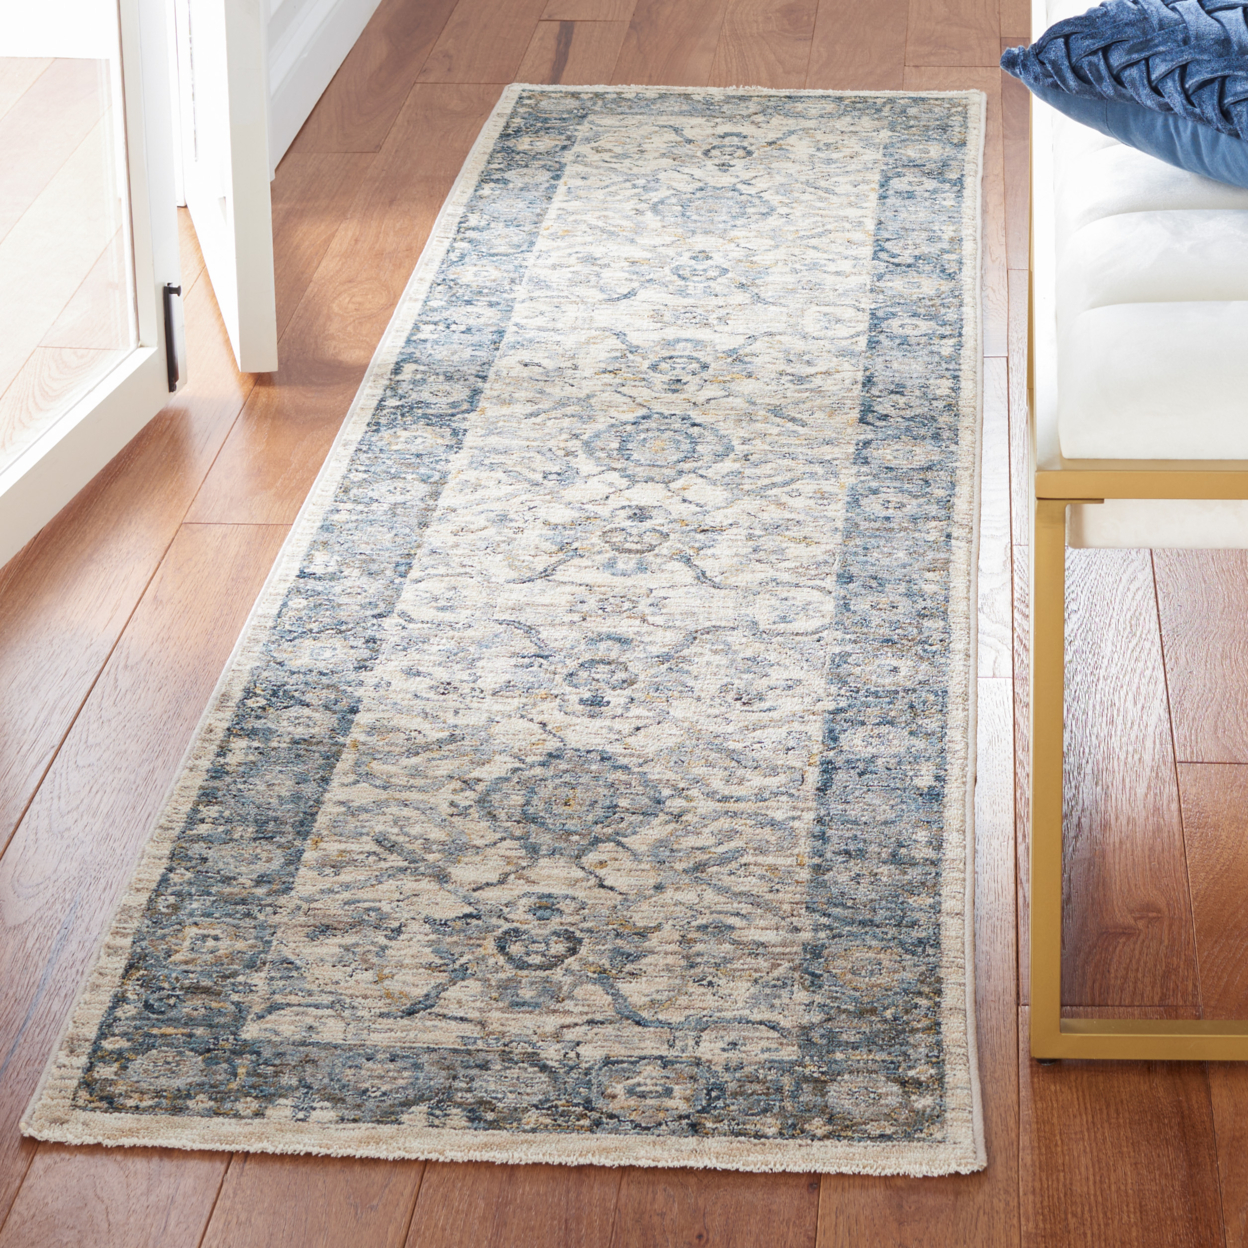 SAFAVIEH Valencia Collection VAL566A Ivory / Blue Rug - 5' X 8'